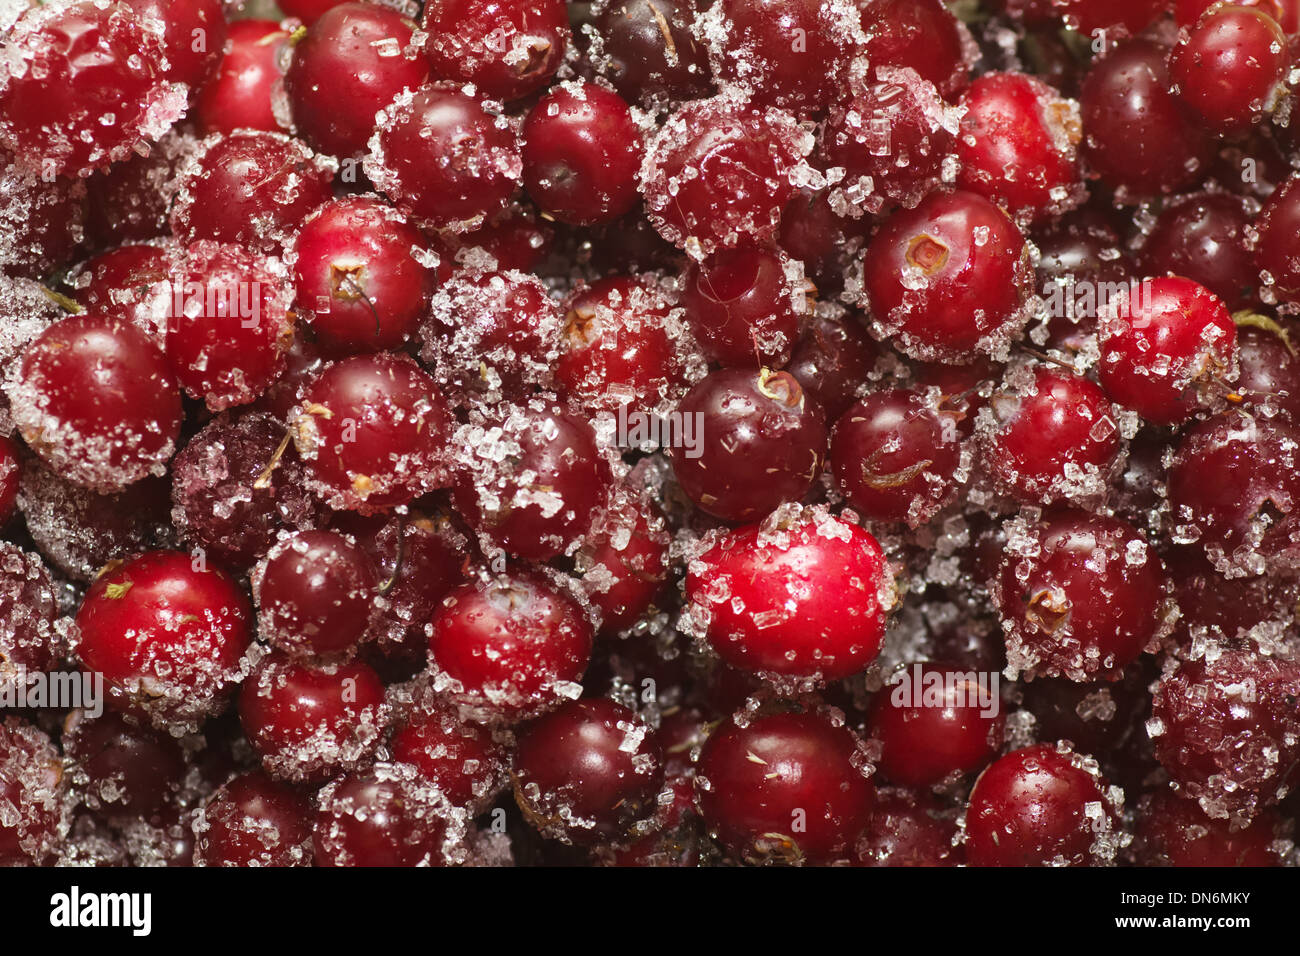 frozen cowberry sprinkled with sugar removed close up Stock Photo